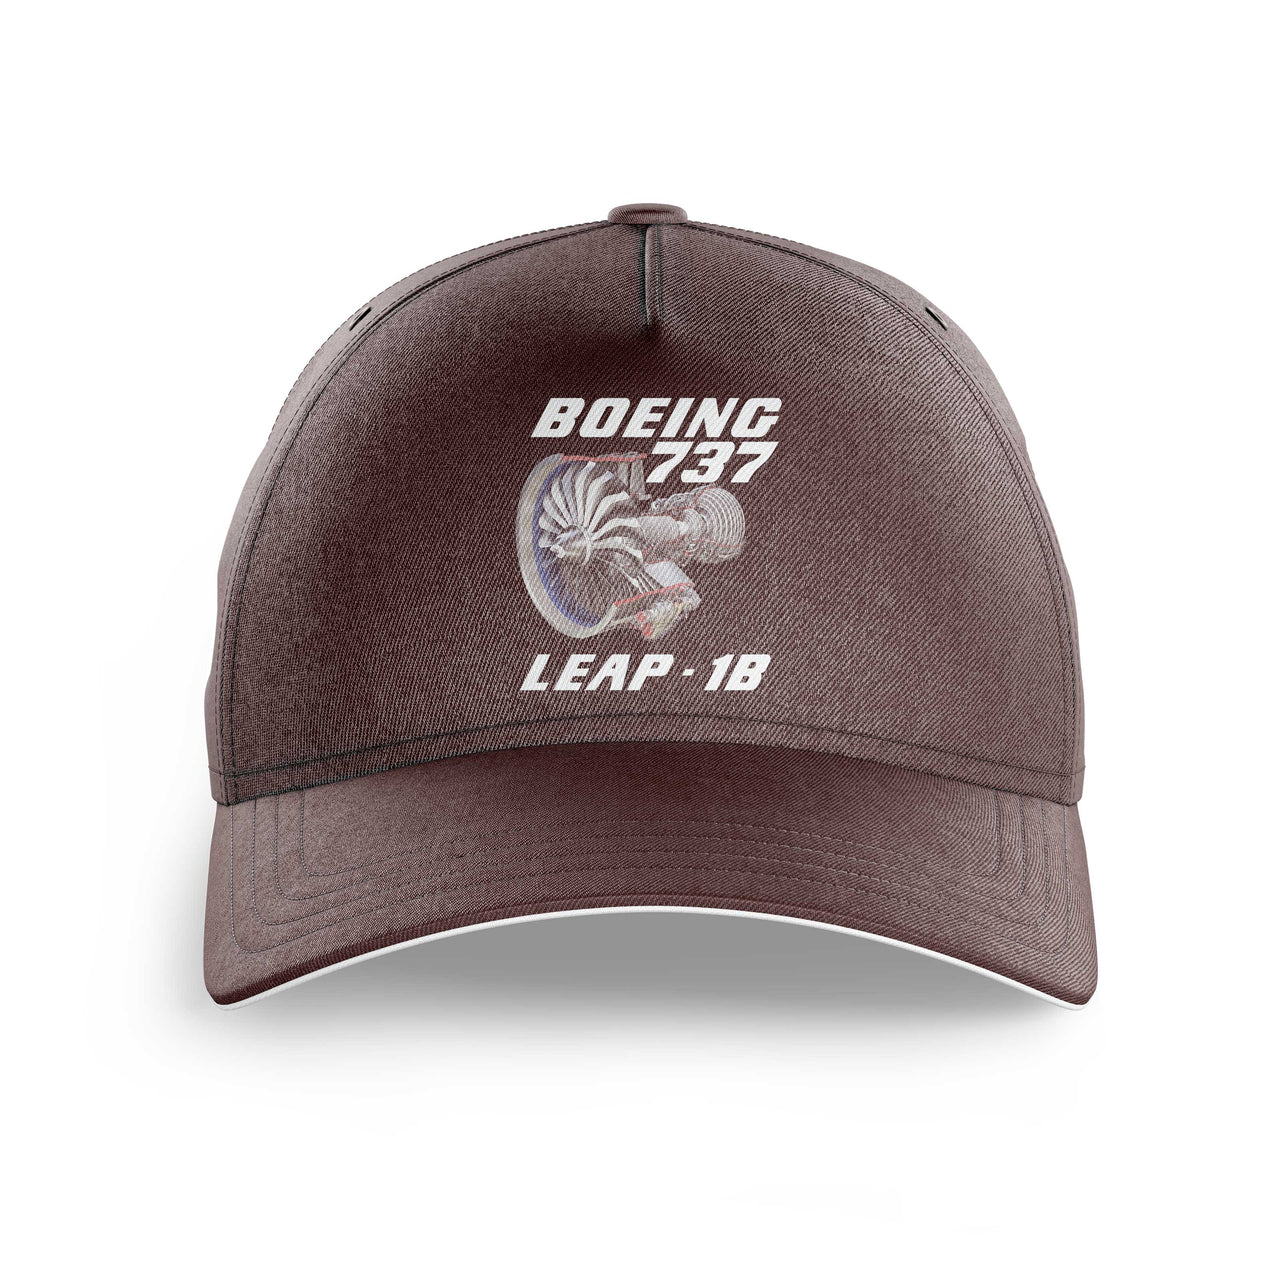 Boeing 737 & Leap 1B Engine Printed Hats